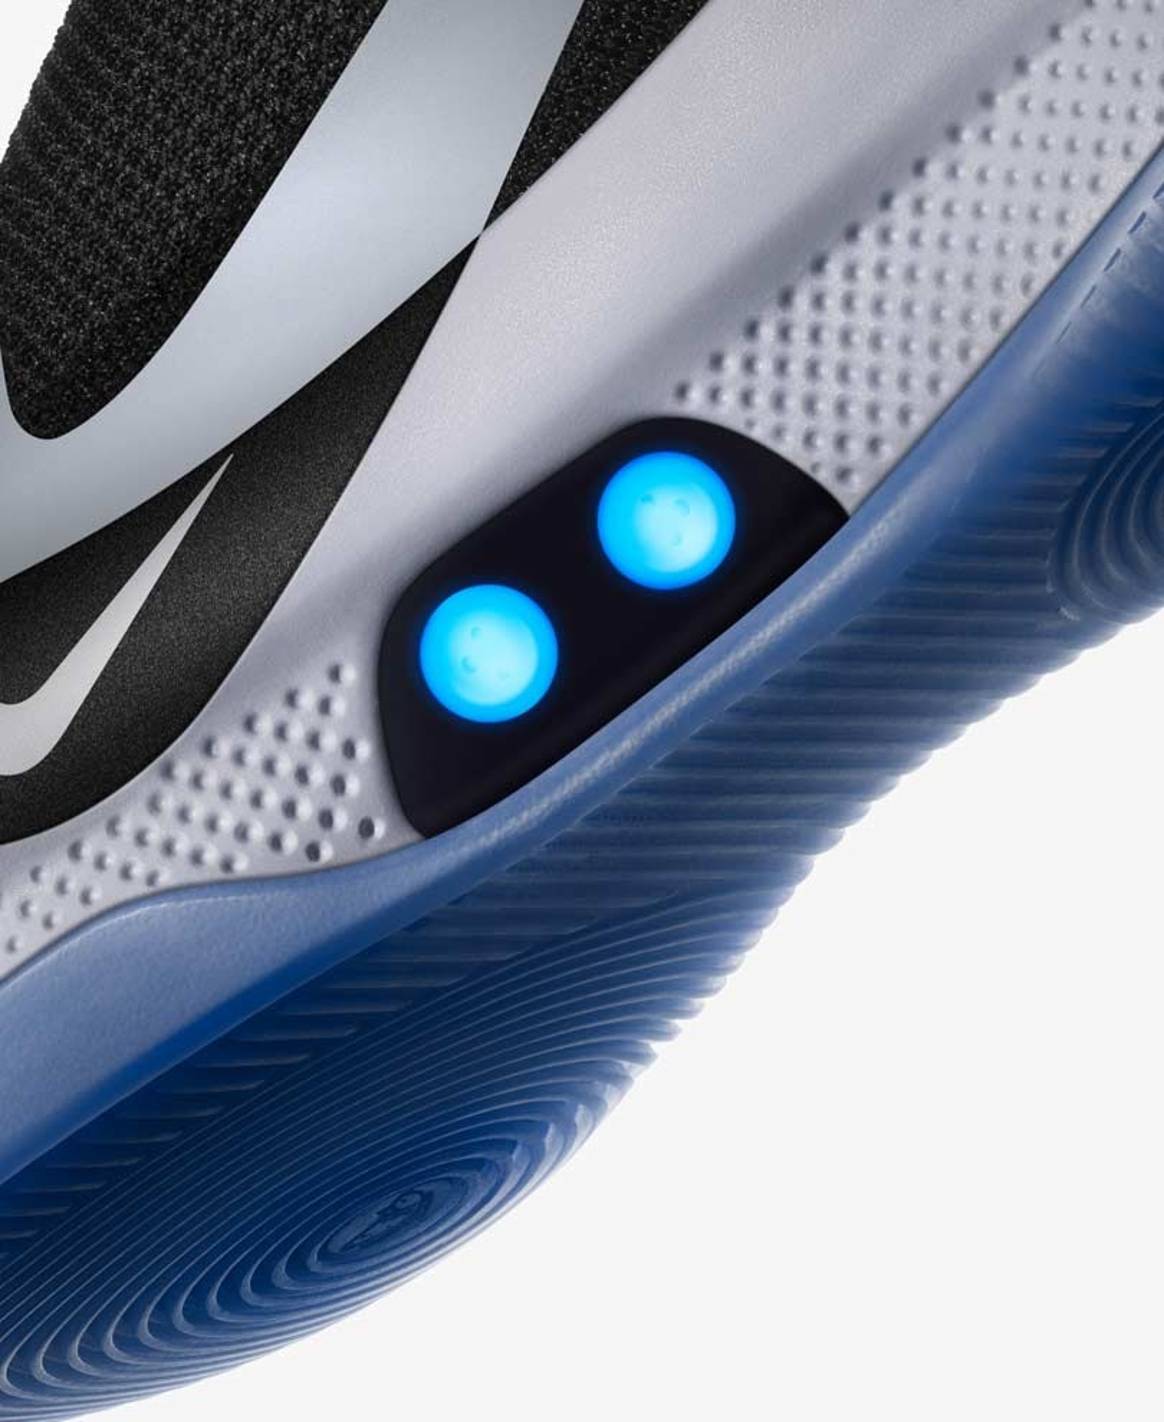 Nike unveils next-generation self-lacing basketball shoes